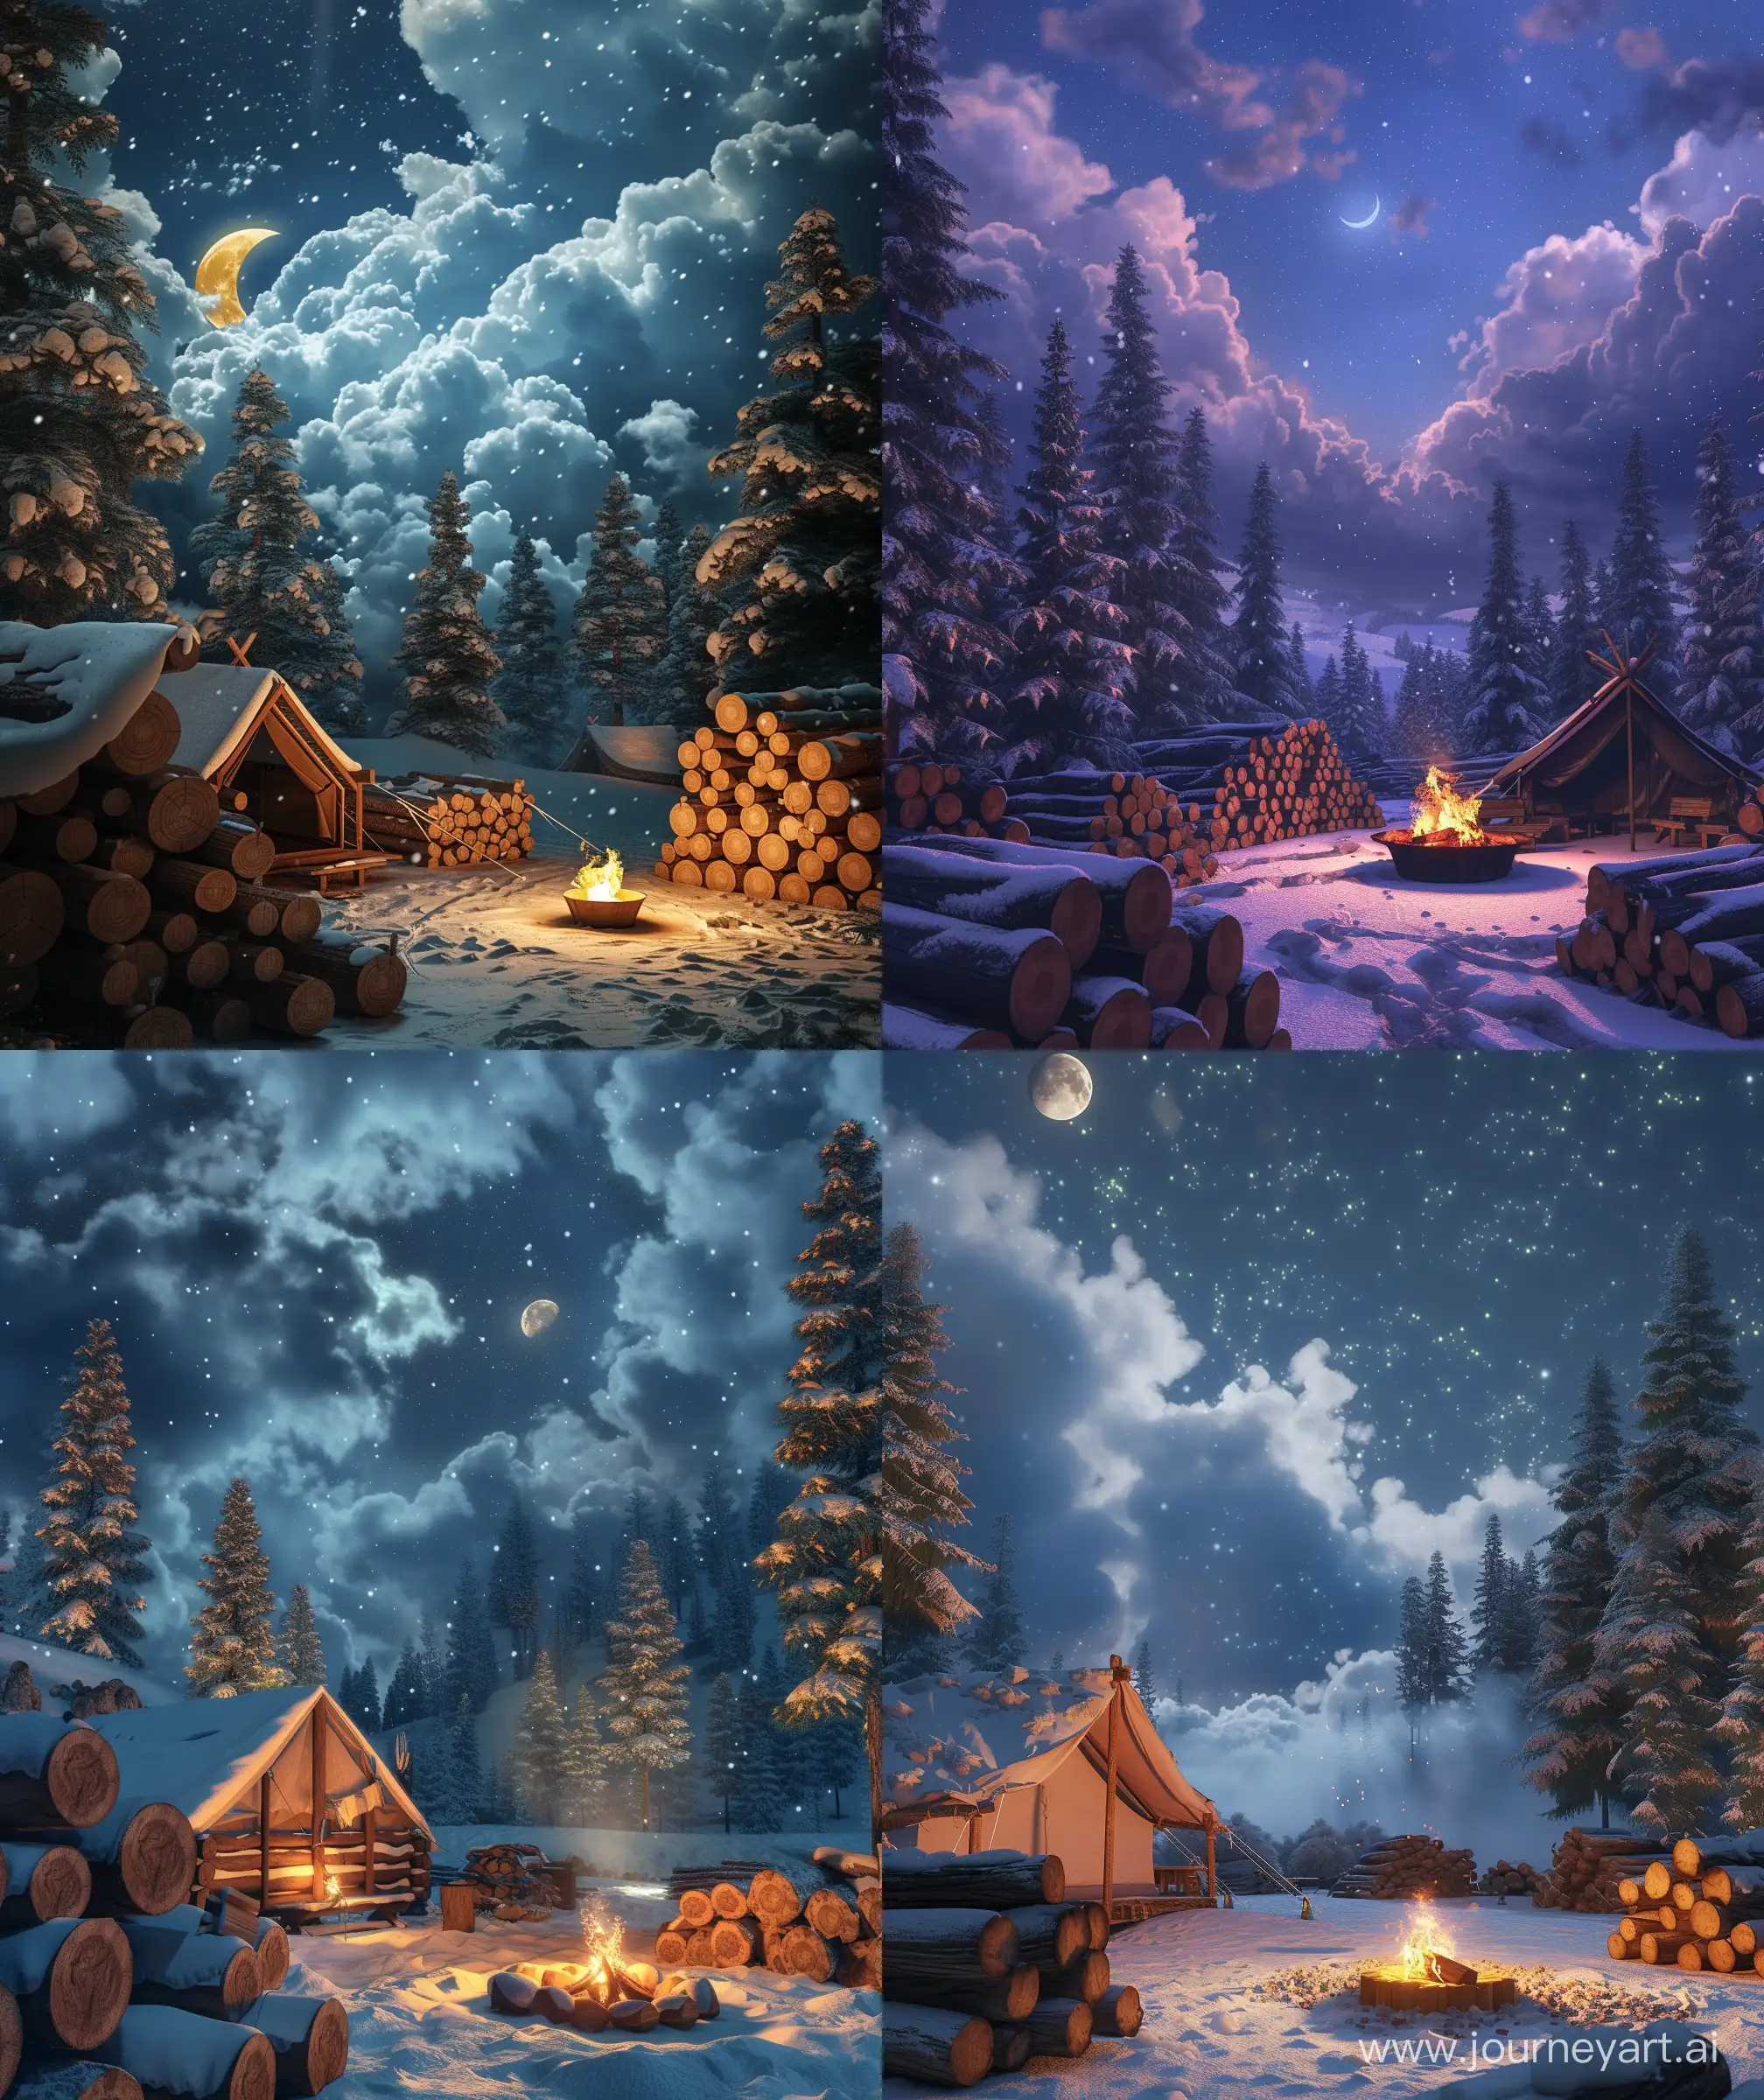 Snowy-Moonlit-Campsite-Cozy-Atmosphere-with-Tent-Fire-Pit-and-Starry-Sky